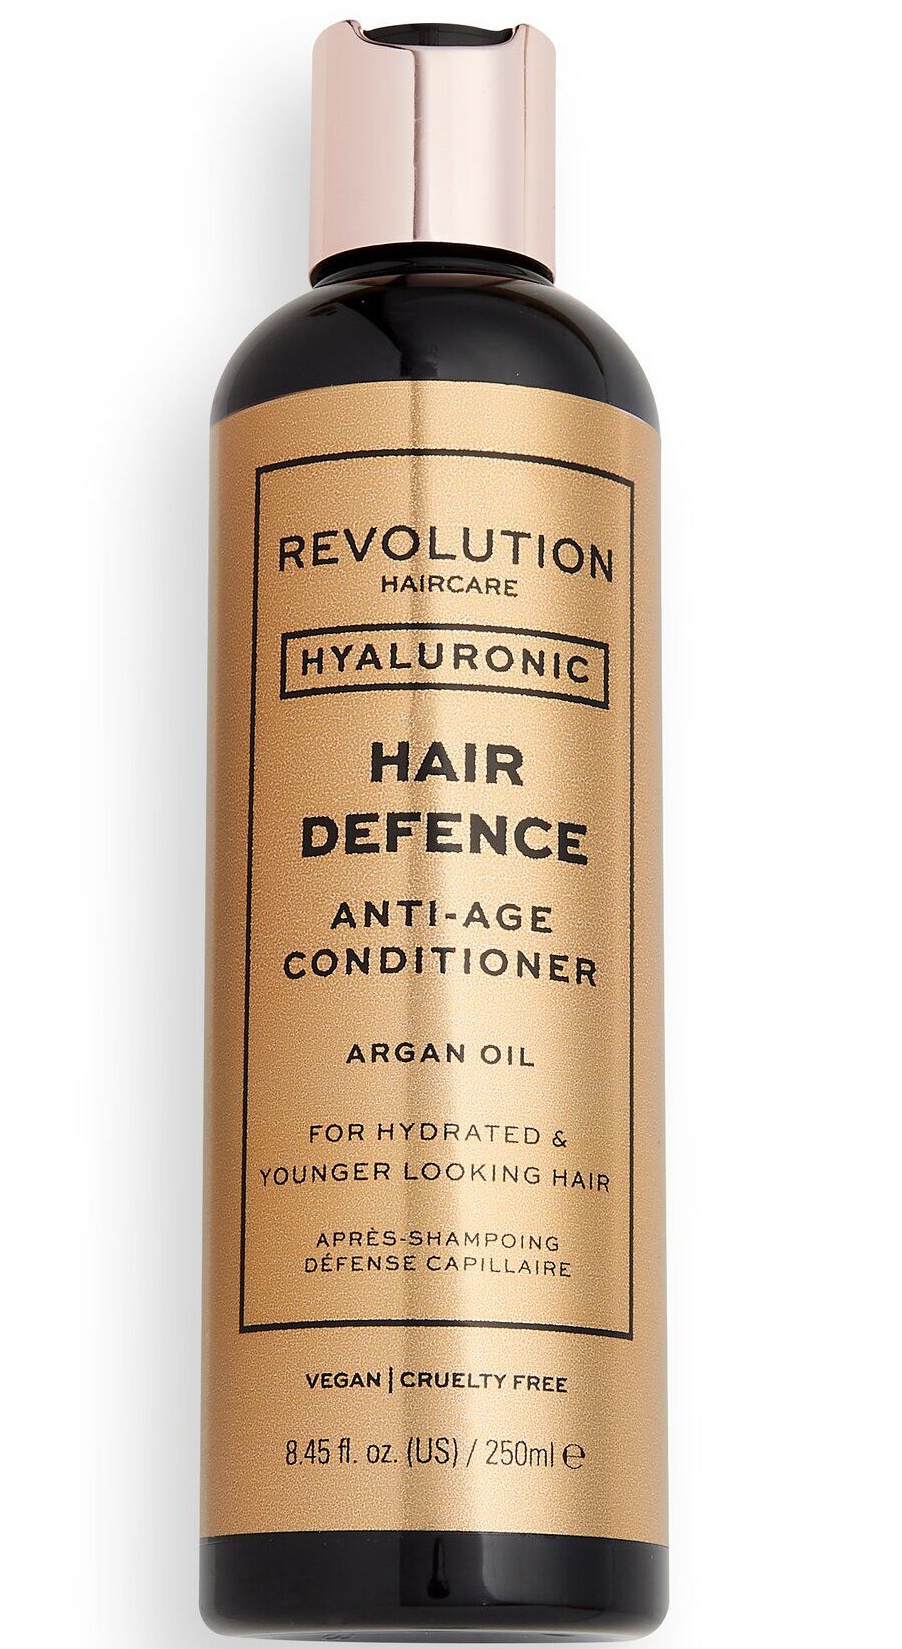 Revolution Haircare Hyaluronic Hair Defence Anti-Age Conditioner